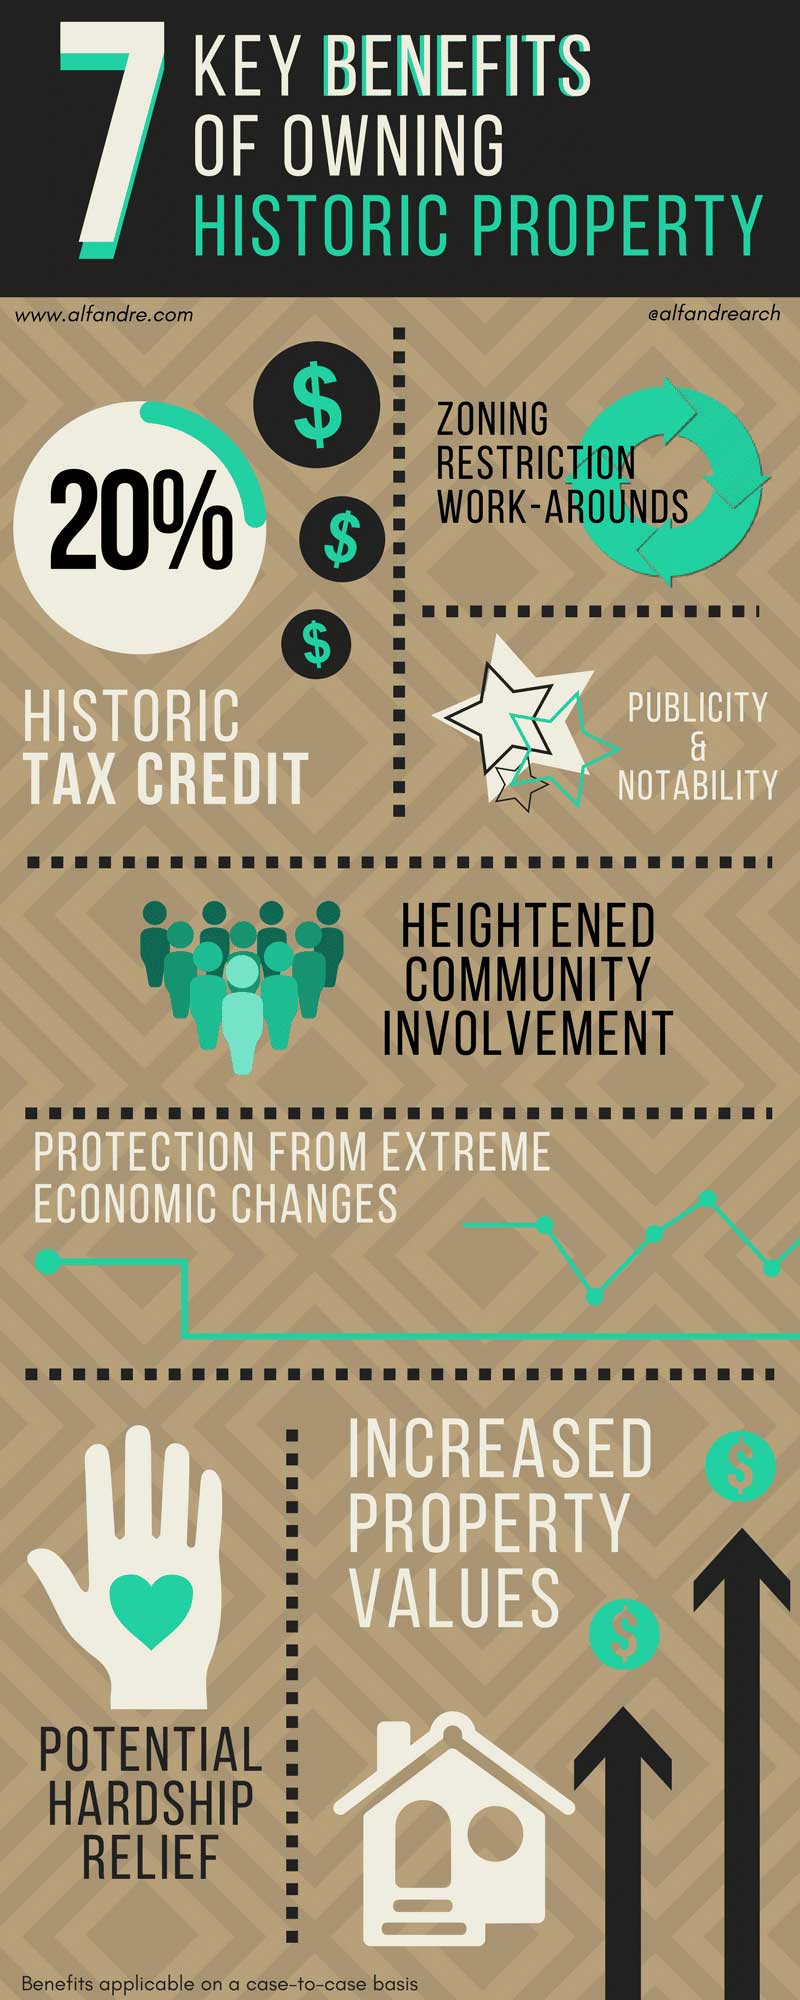 Infographic of 7 Key Benefits of Owning Historic Property Using Pictures - Low Resolution